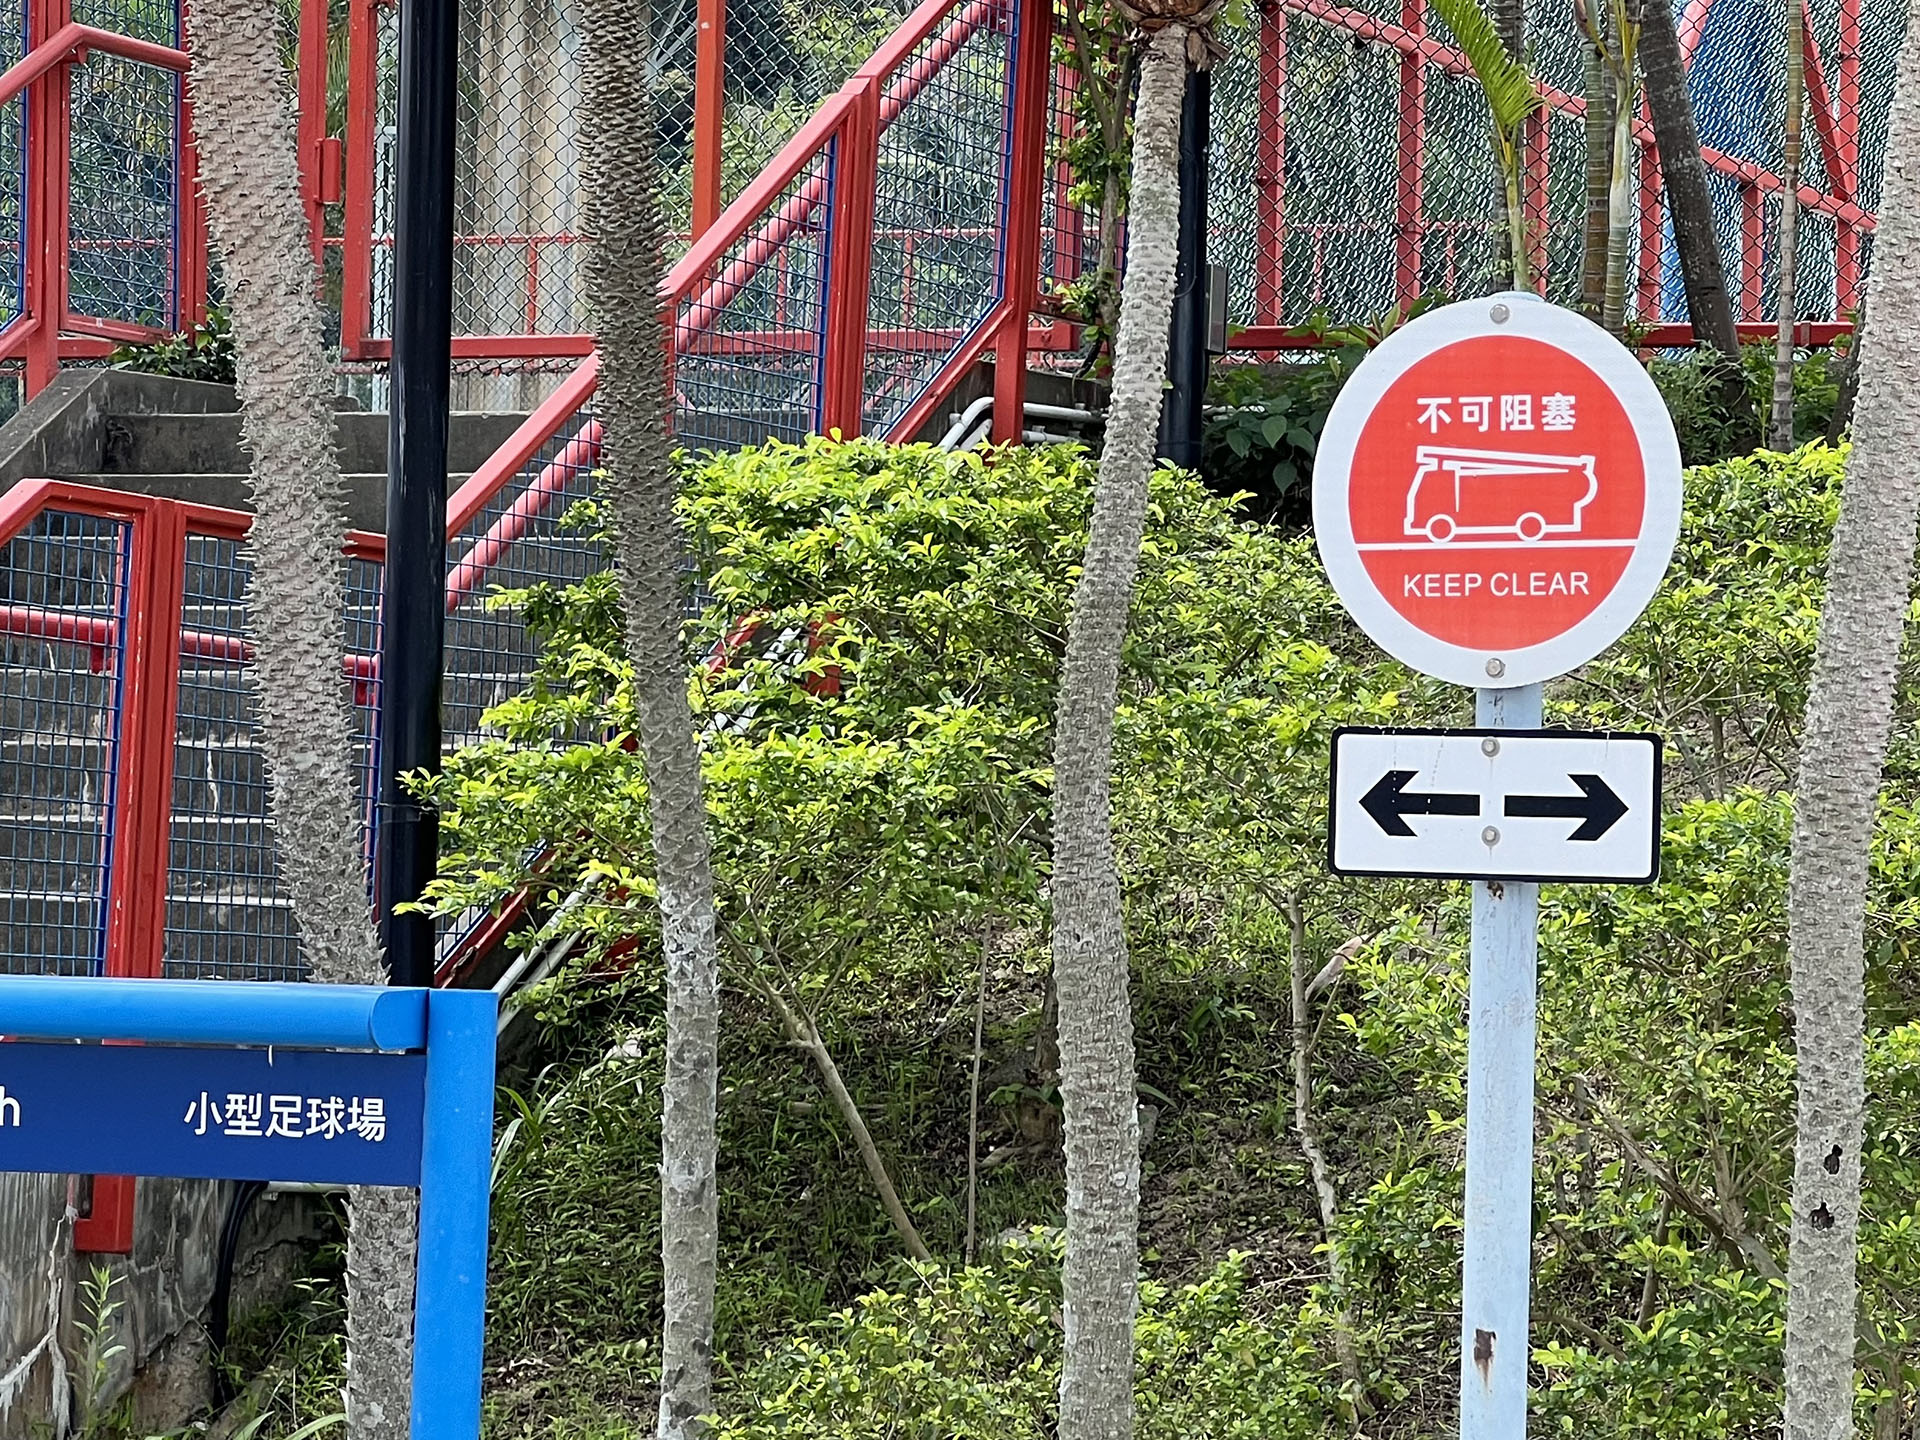 "Keep Clear" Traffic Sign at HKUST Seafront